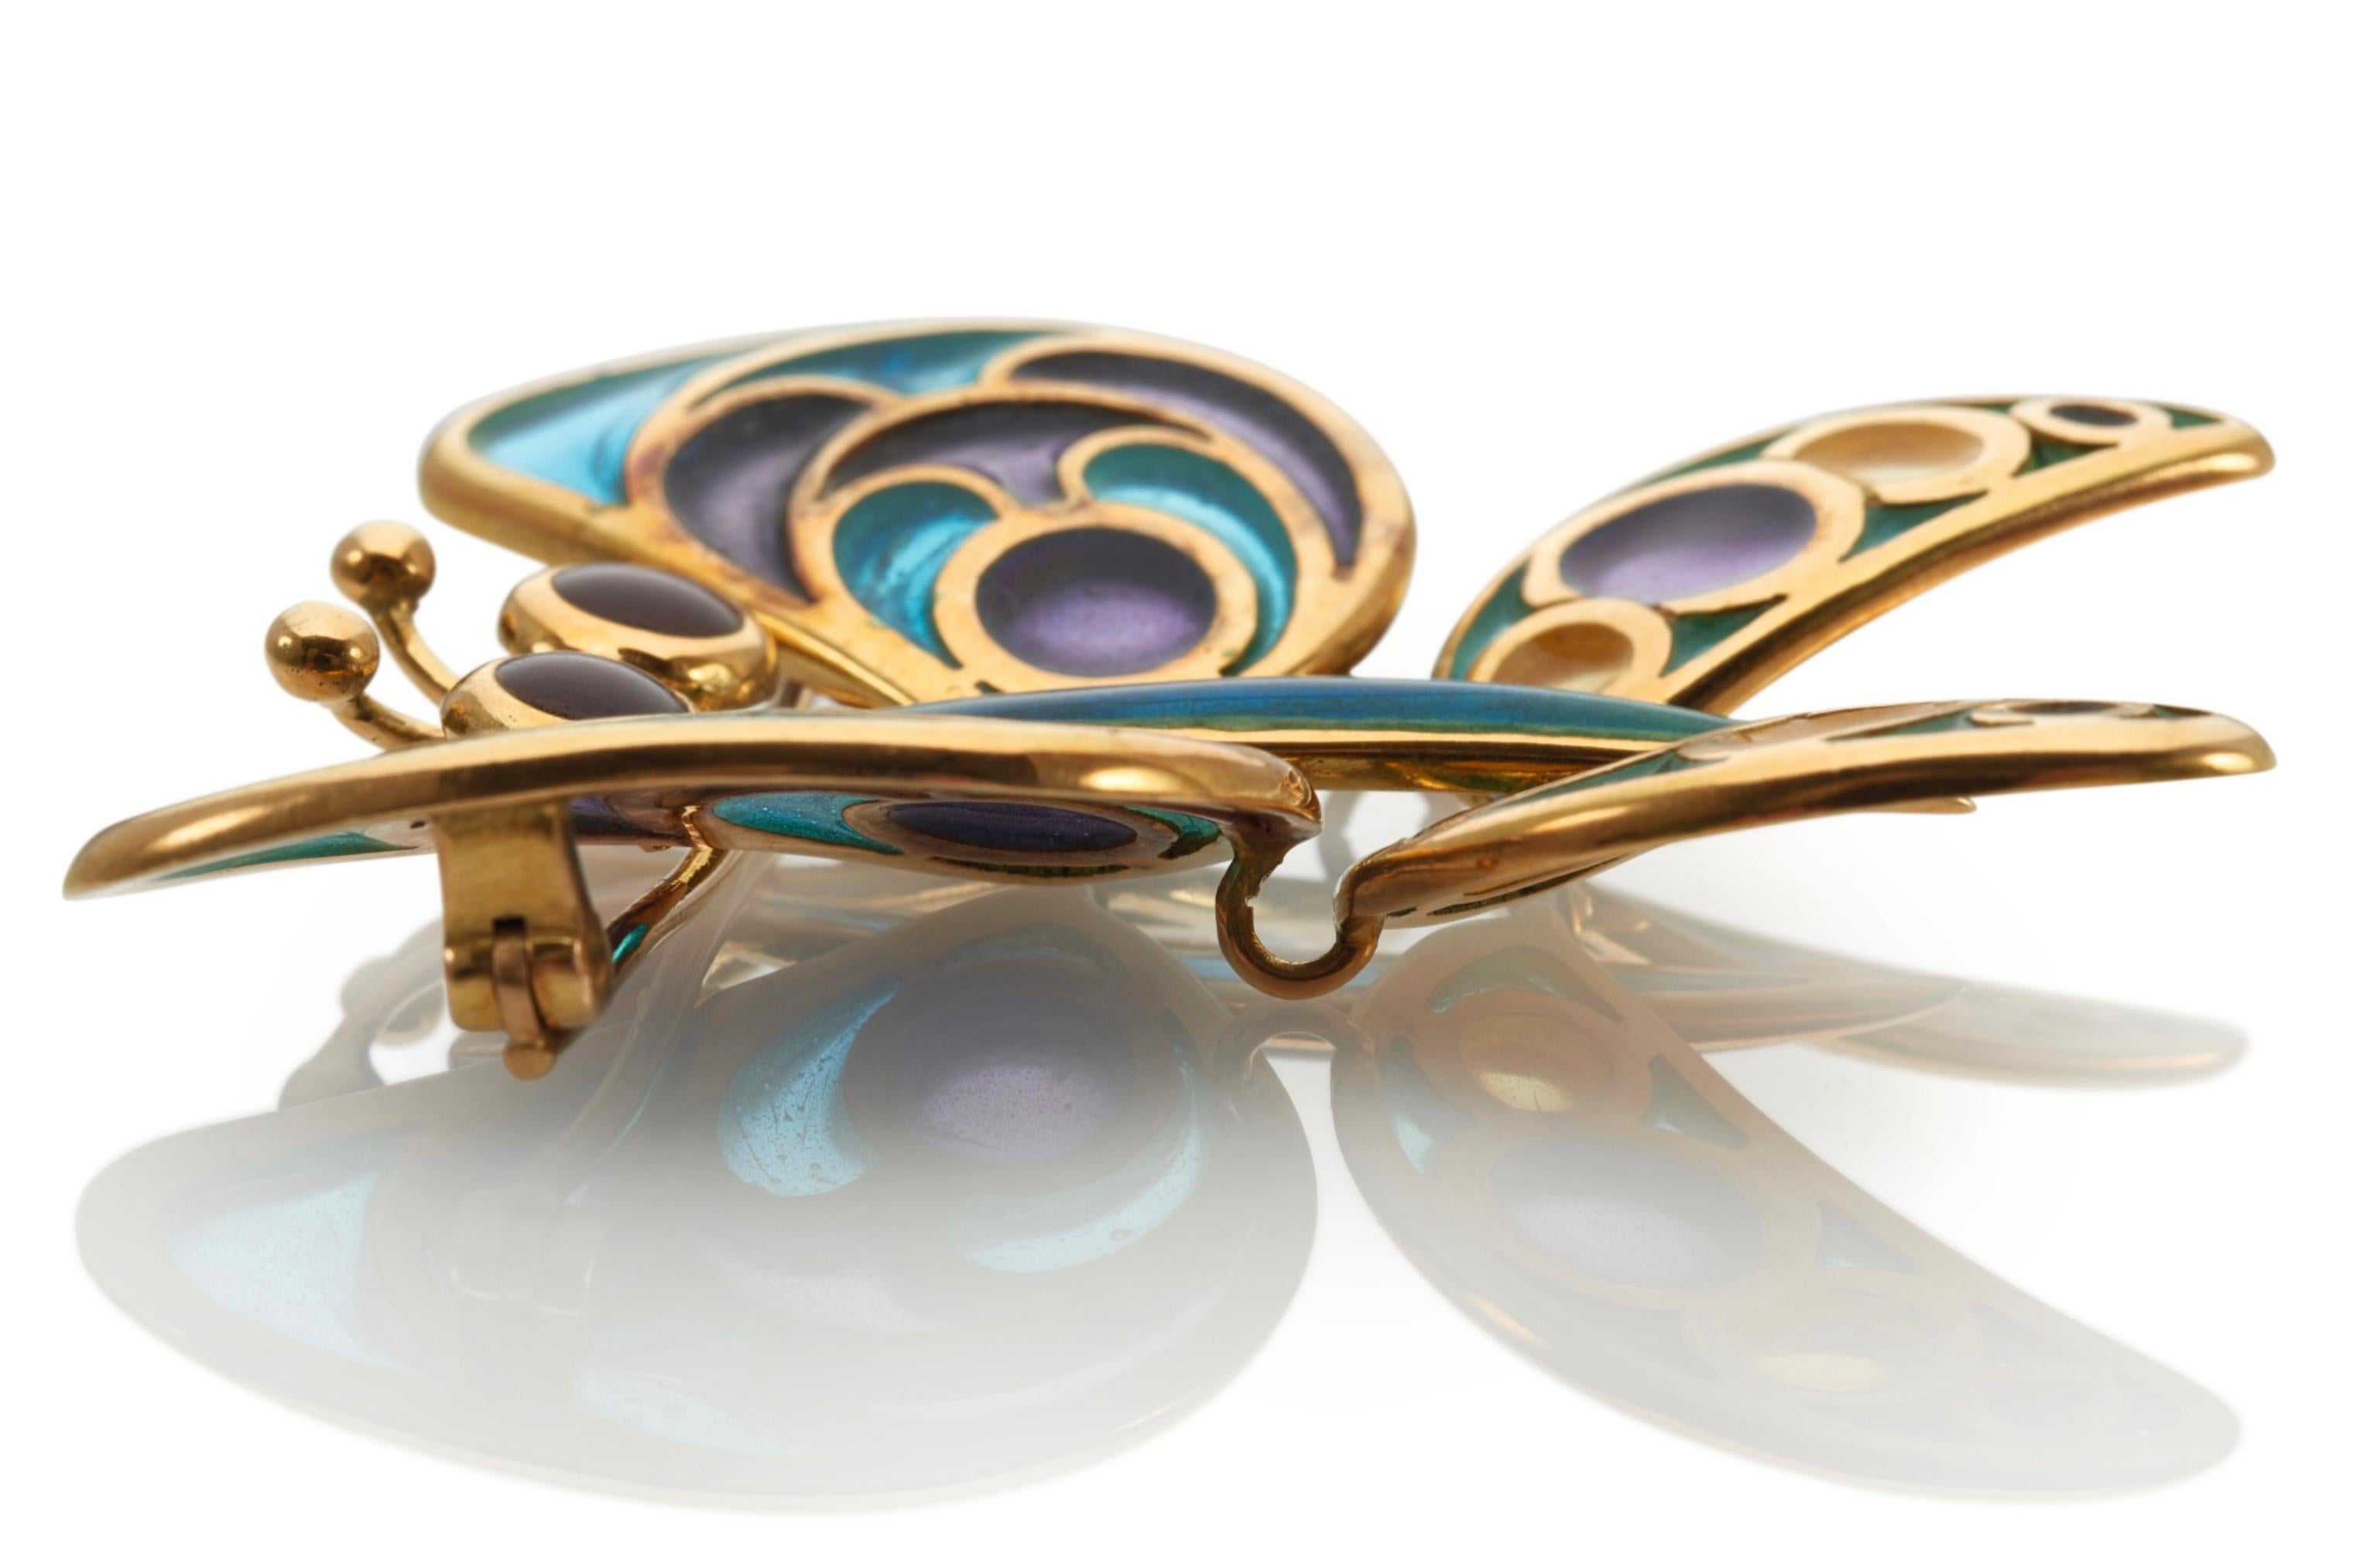 The brooch of polychrome virtue pastae designed as a butterfly from Italy.